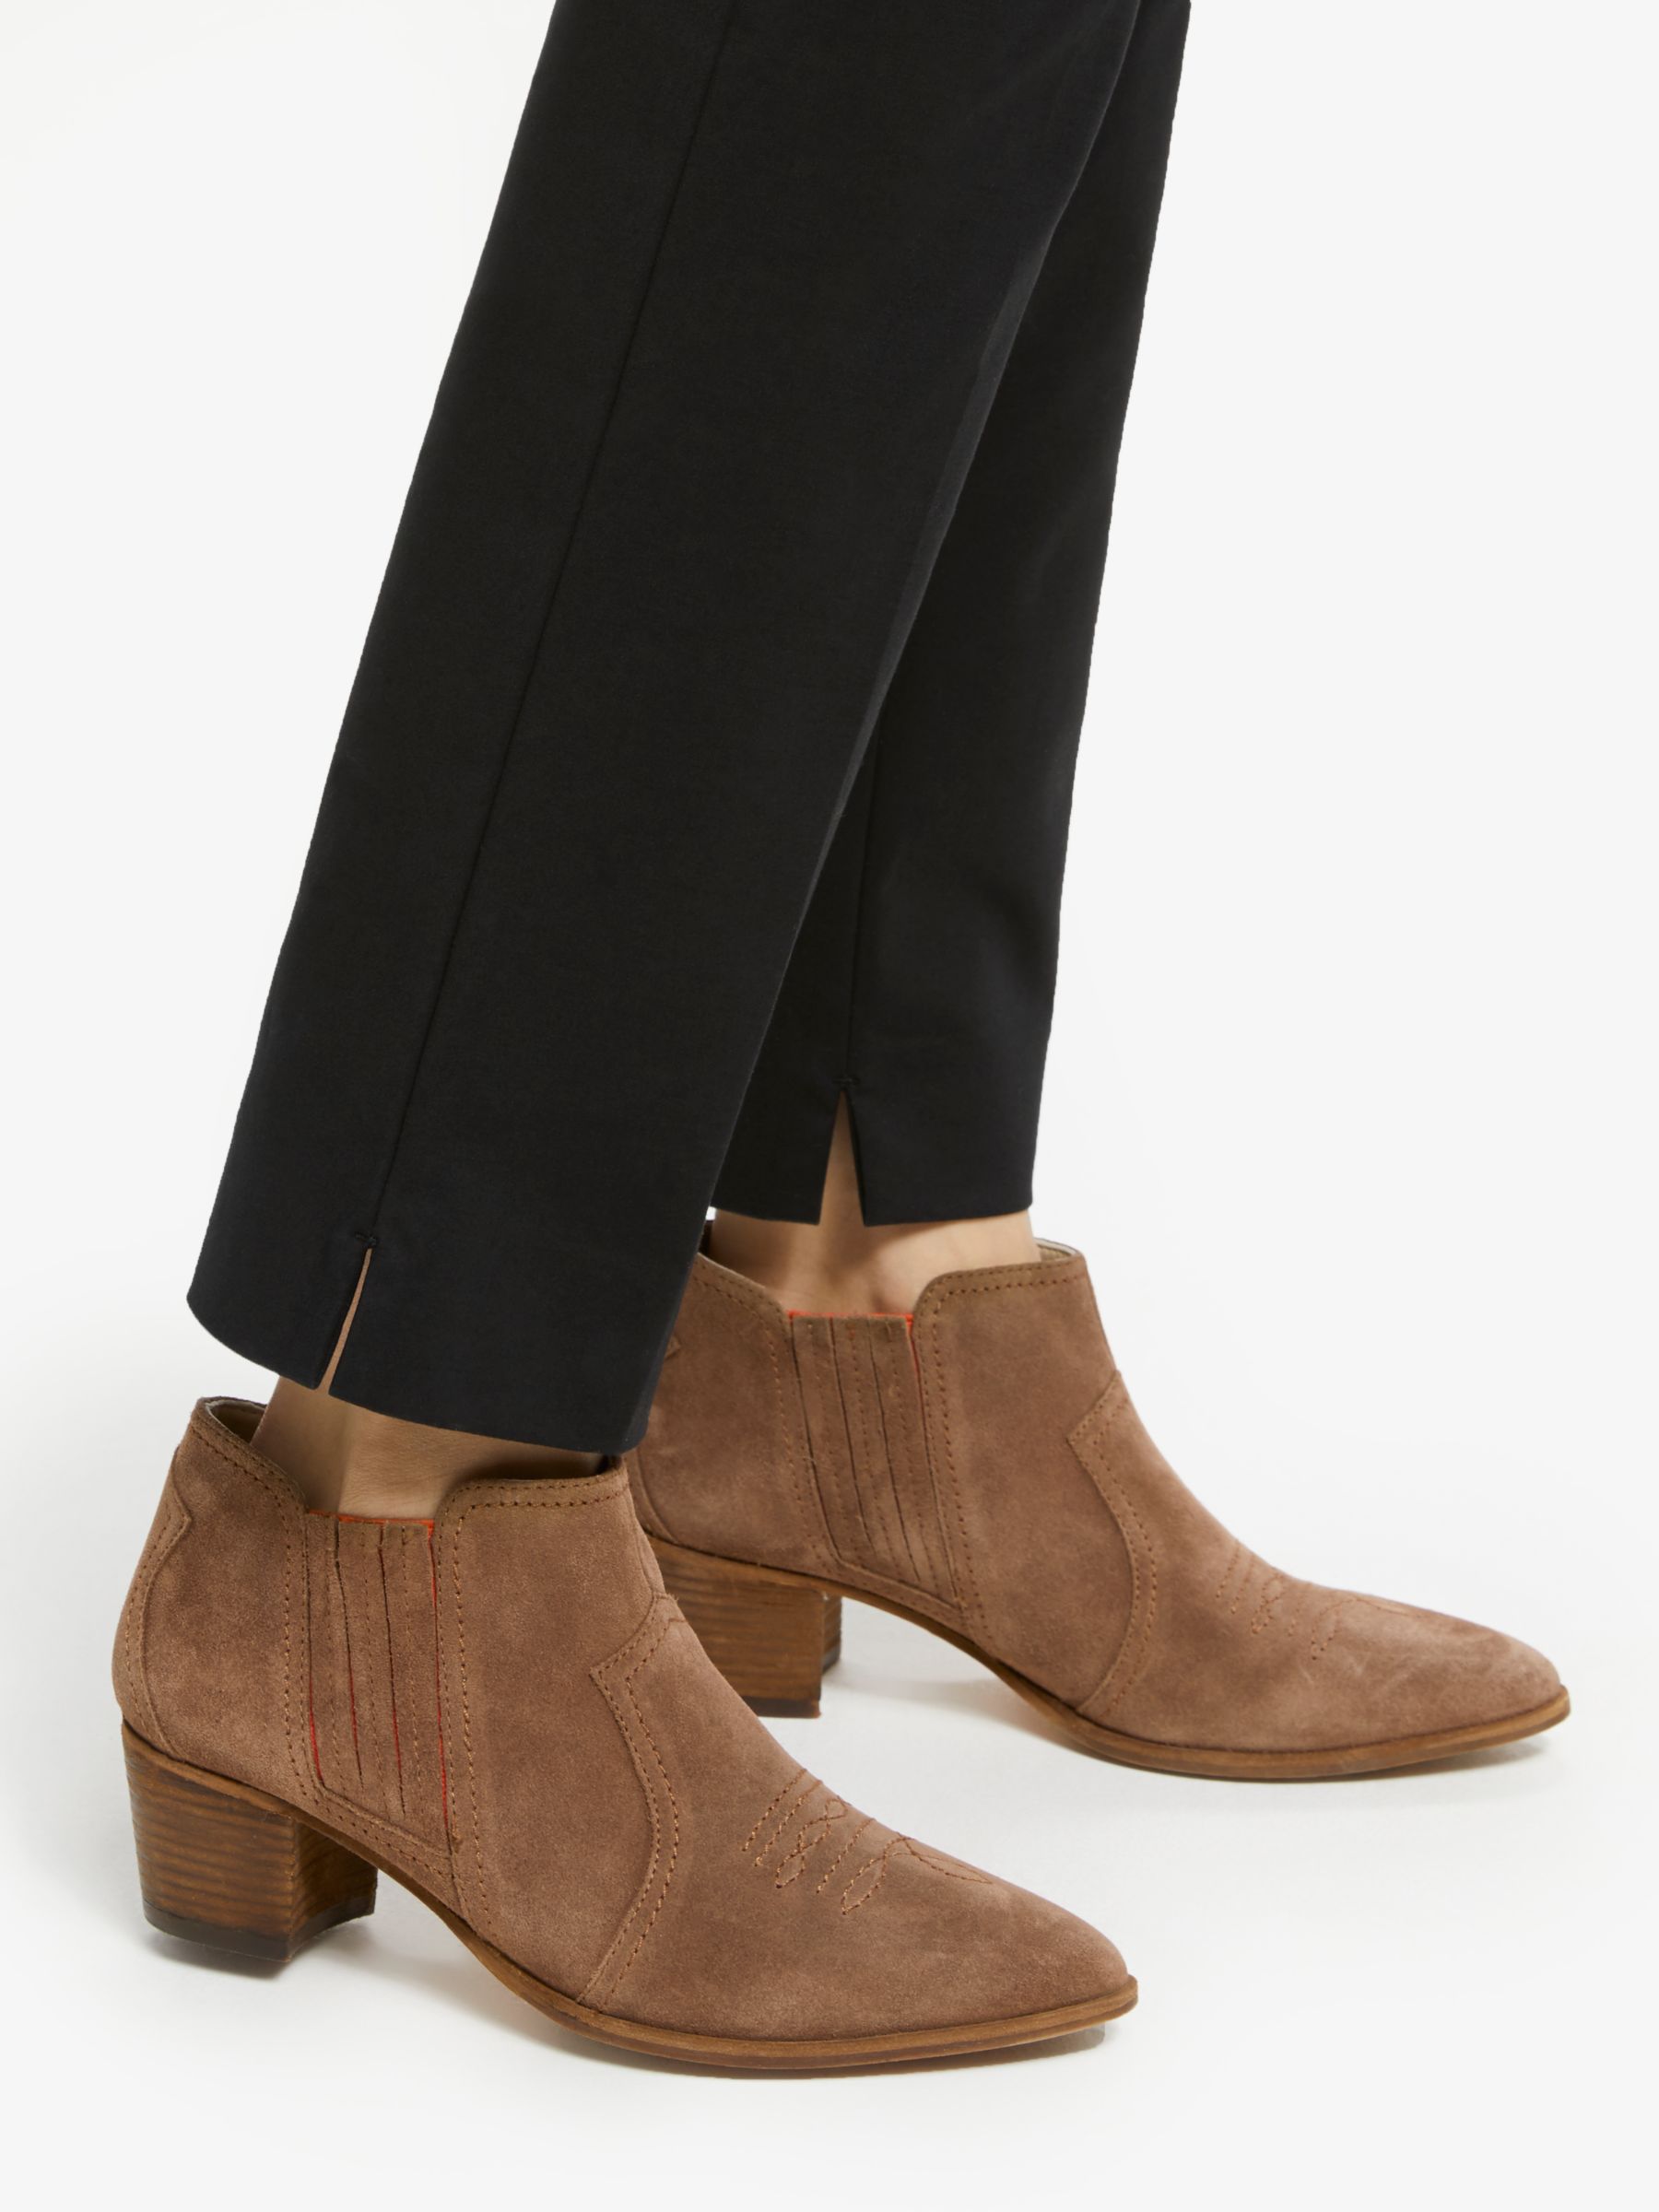 Boden Clifton Ankle Boots, Tan Suede at 